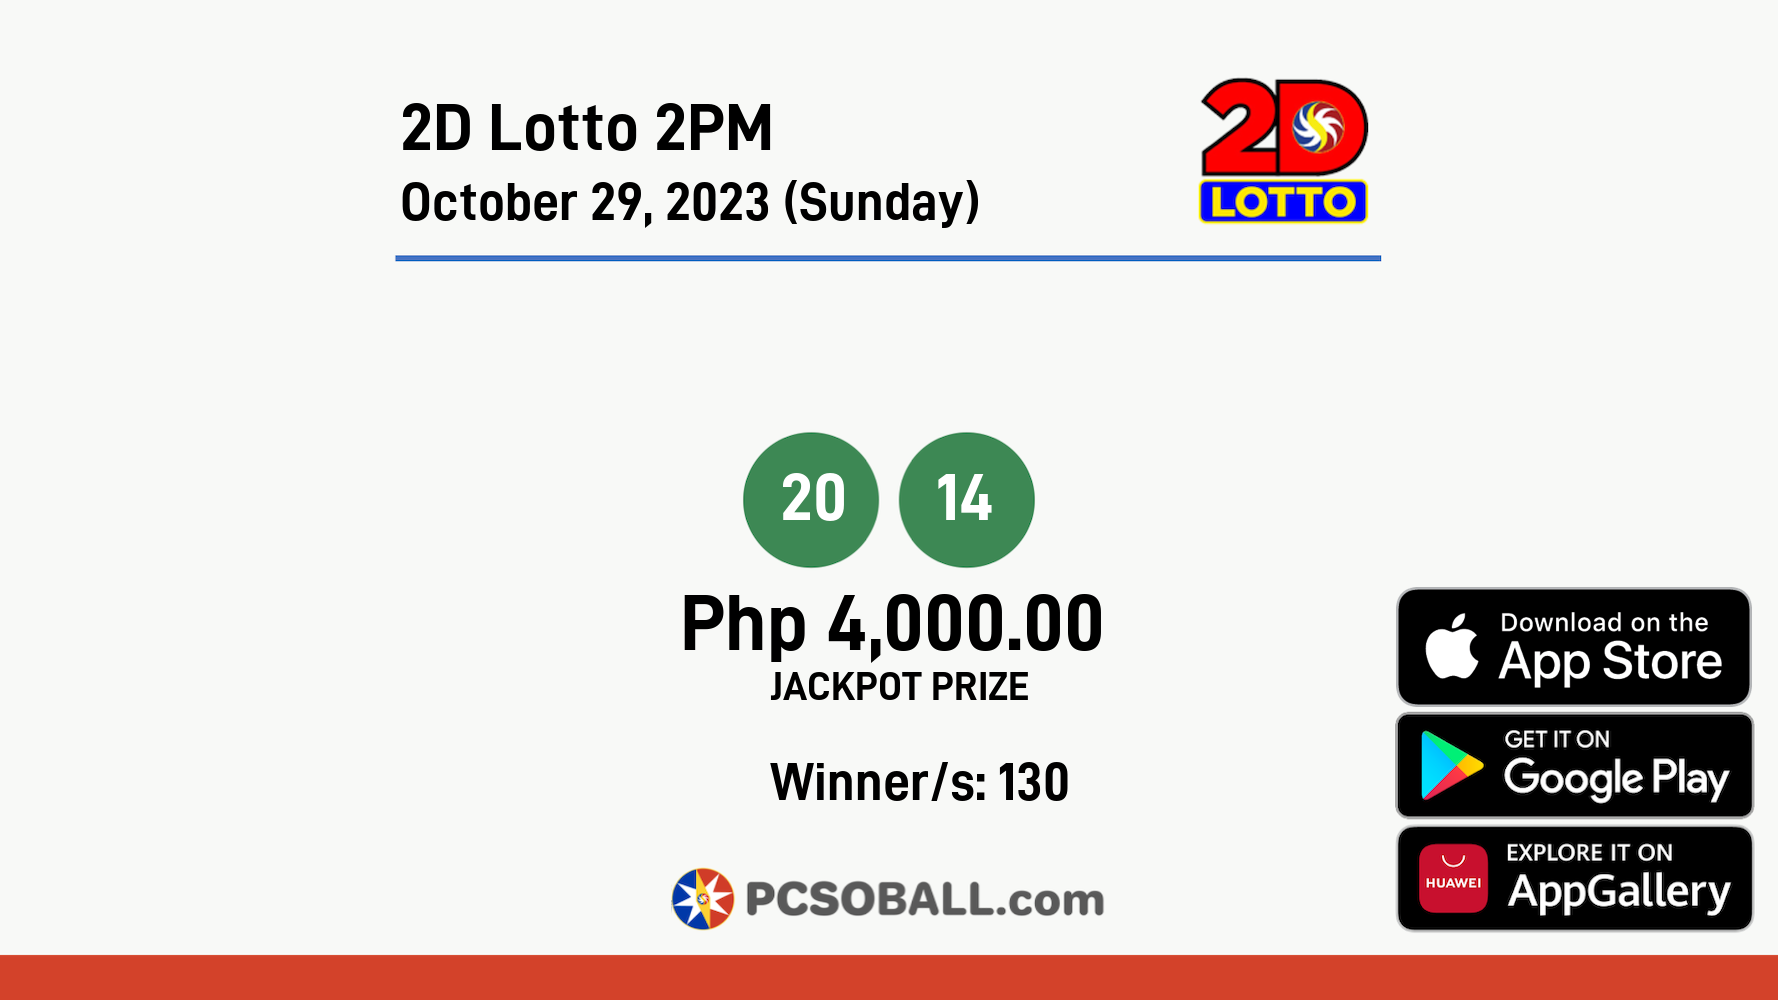 2D Lotto 2PM October 29, 2023 (Sunday) Result